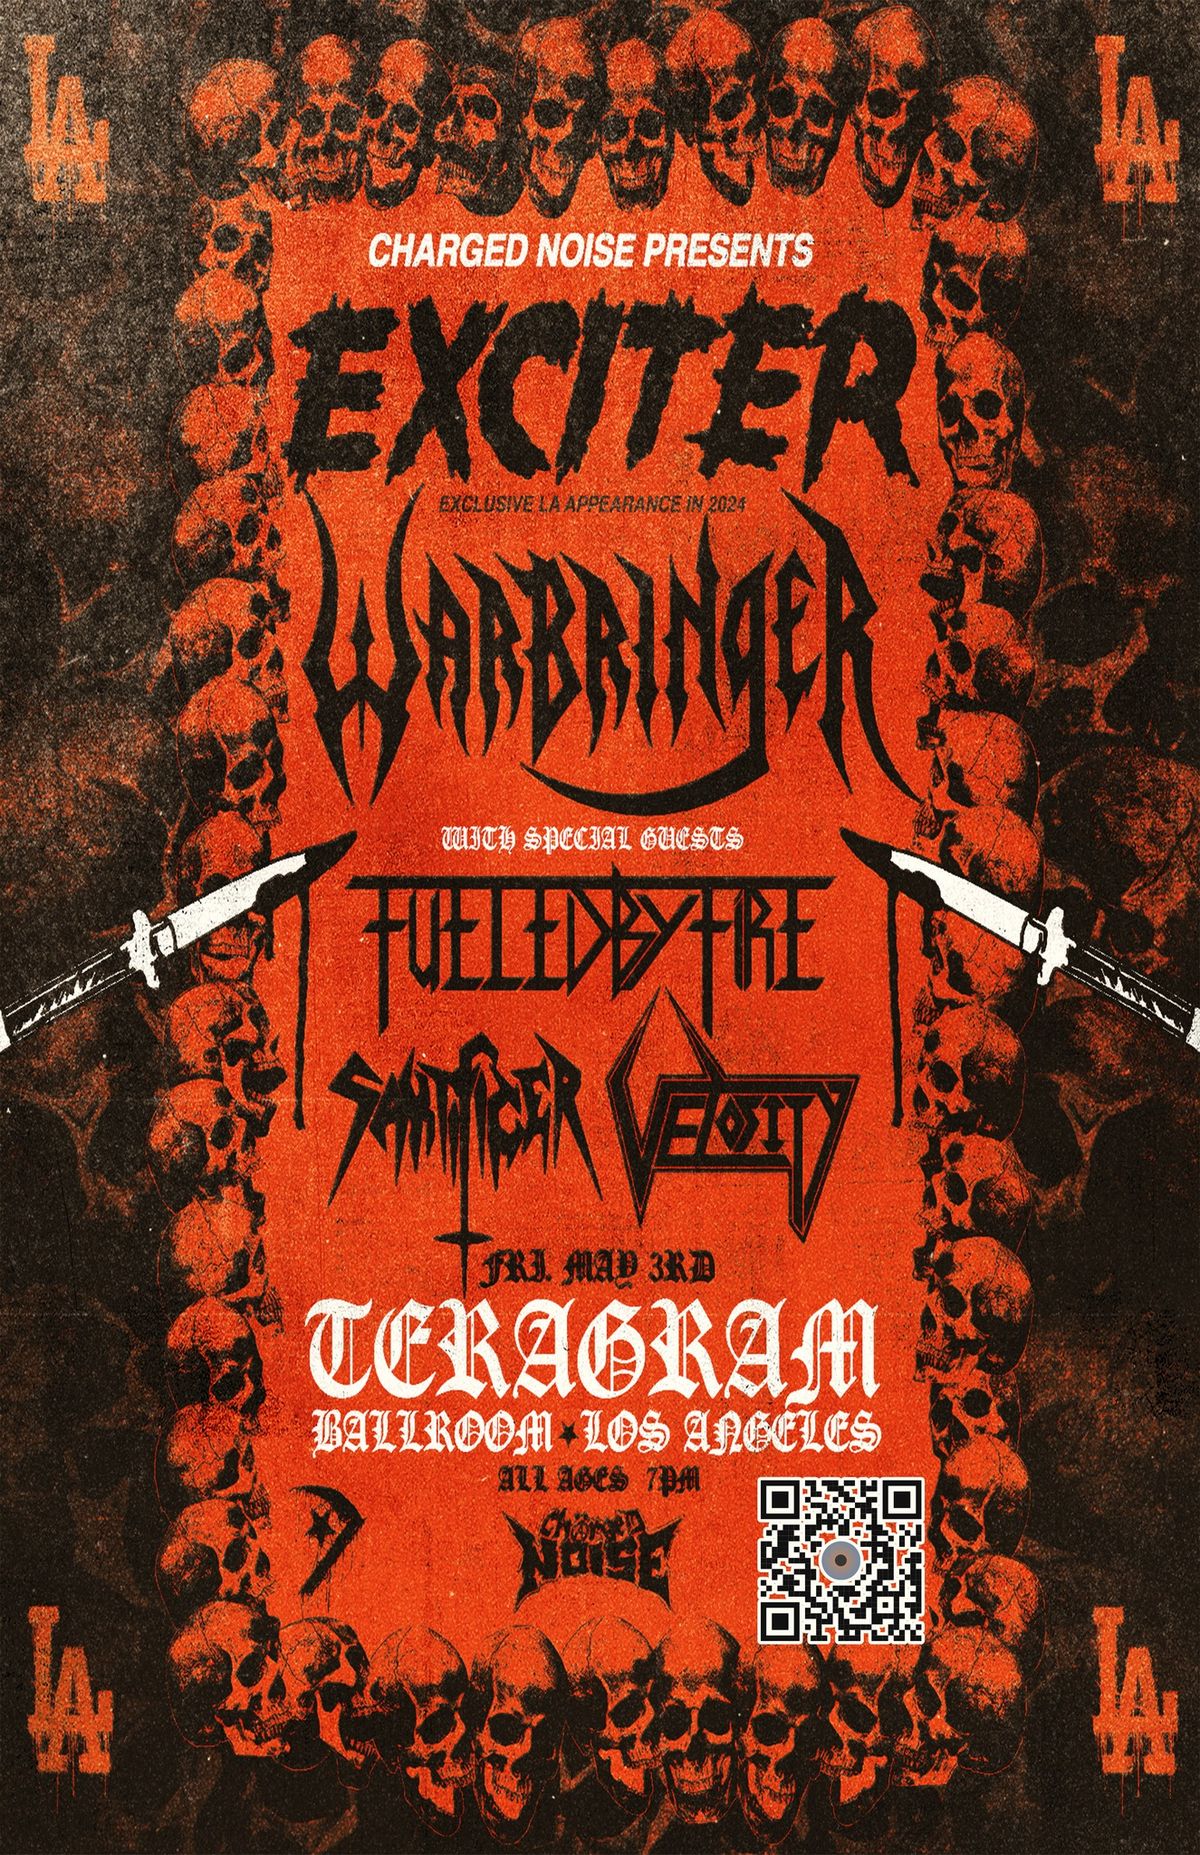 Charged Noise presents Exciter with Warbringer, FUELED BY FIRE, Sakrificer and Velosity